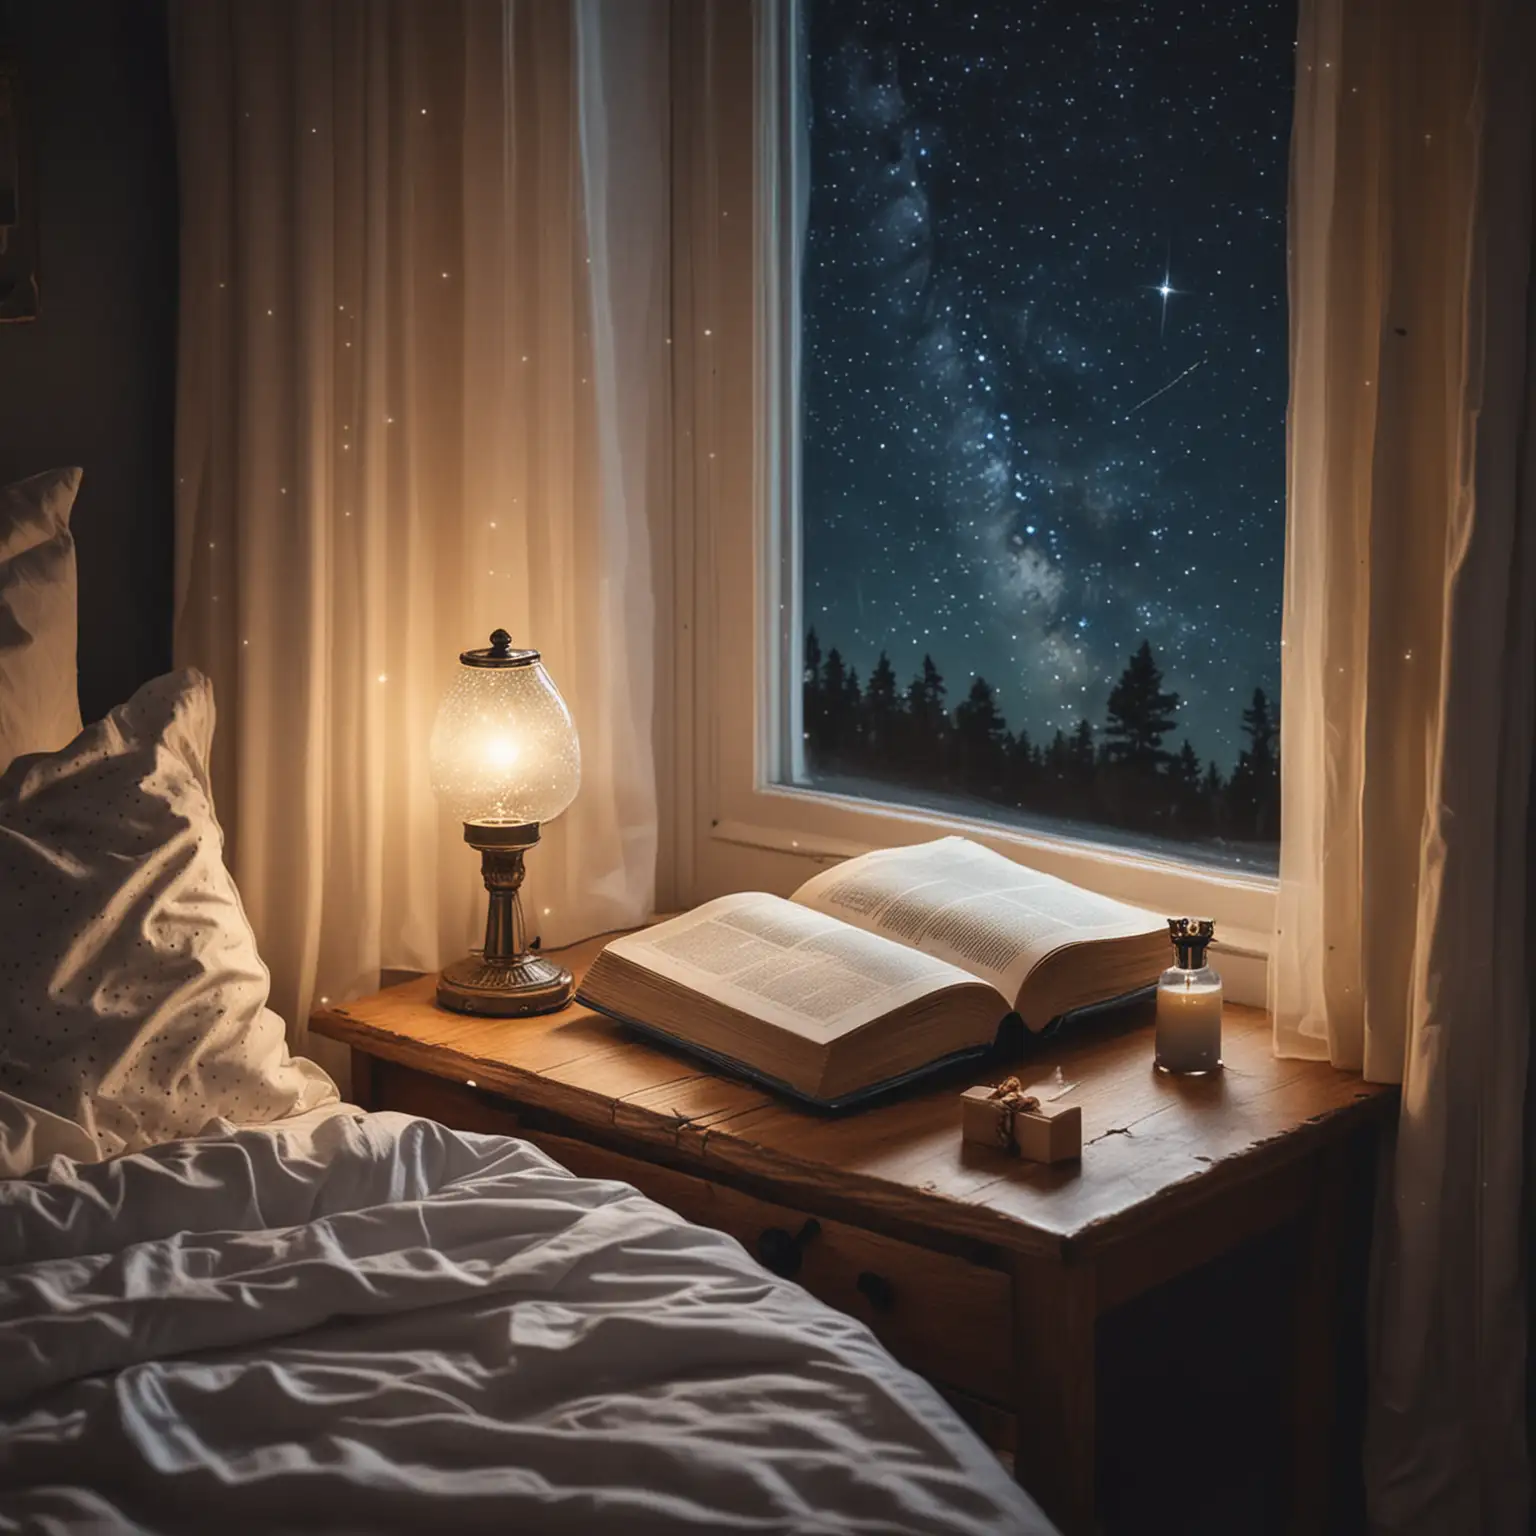 Cozy-Nighttime-Reading-with-Starry-Sky-View